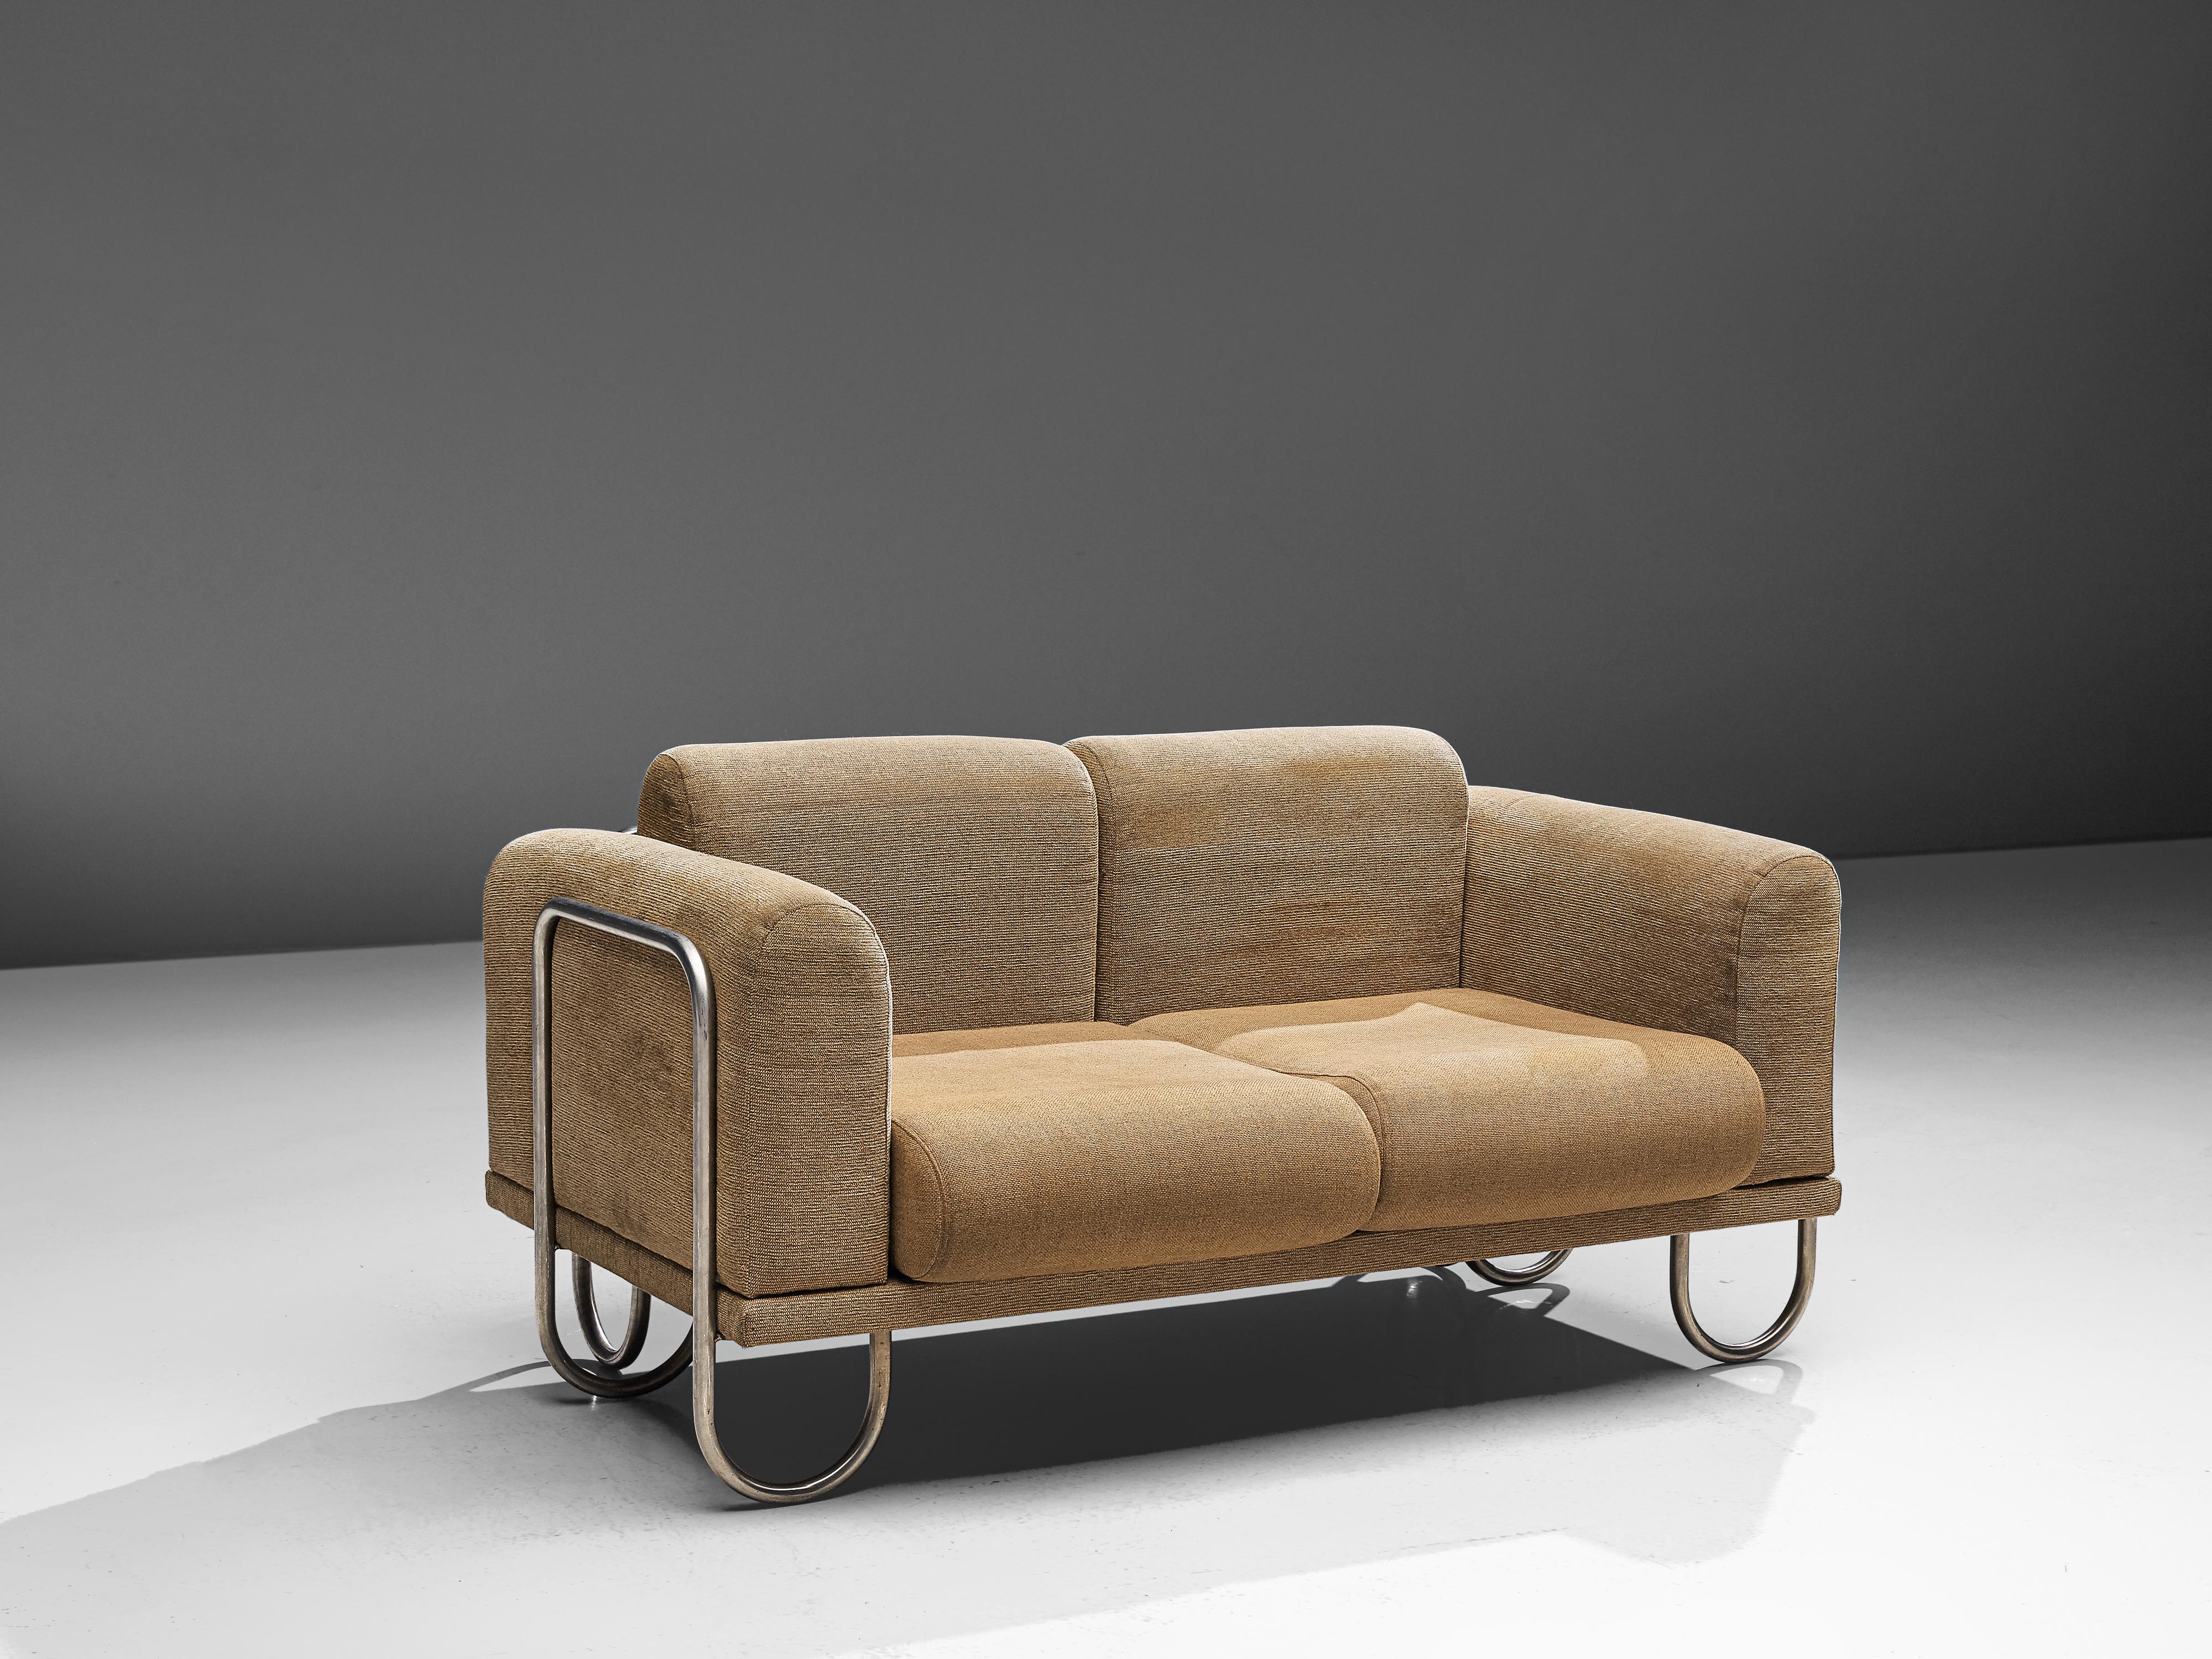 Byron Botker for Landes, sofa, beige fabric, chrome-plated steel, United States, 1970s

A comfortable sofa that features a curved, chromed tubular frame. The frame appears to be an ongoing curved line, moving upwards to support the cushions and